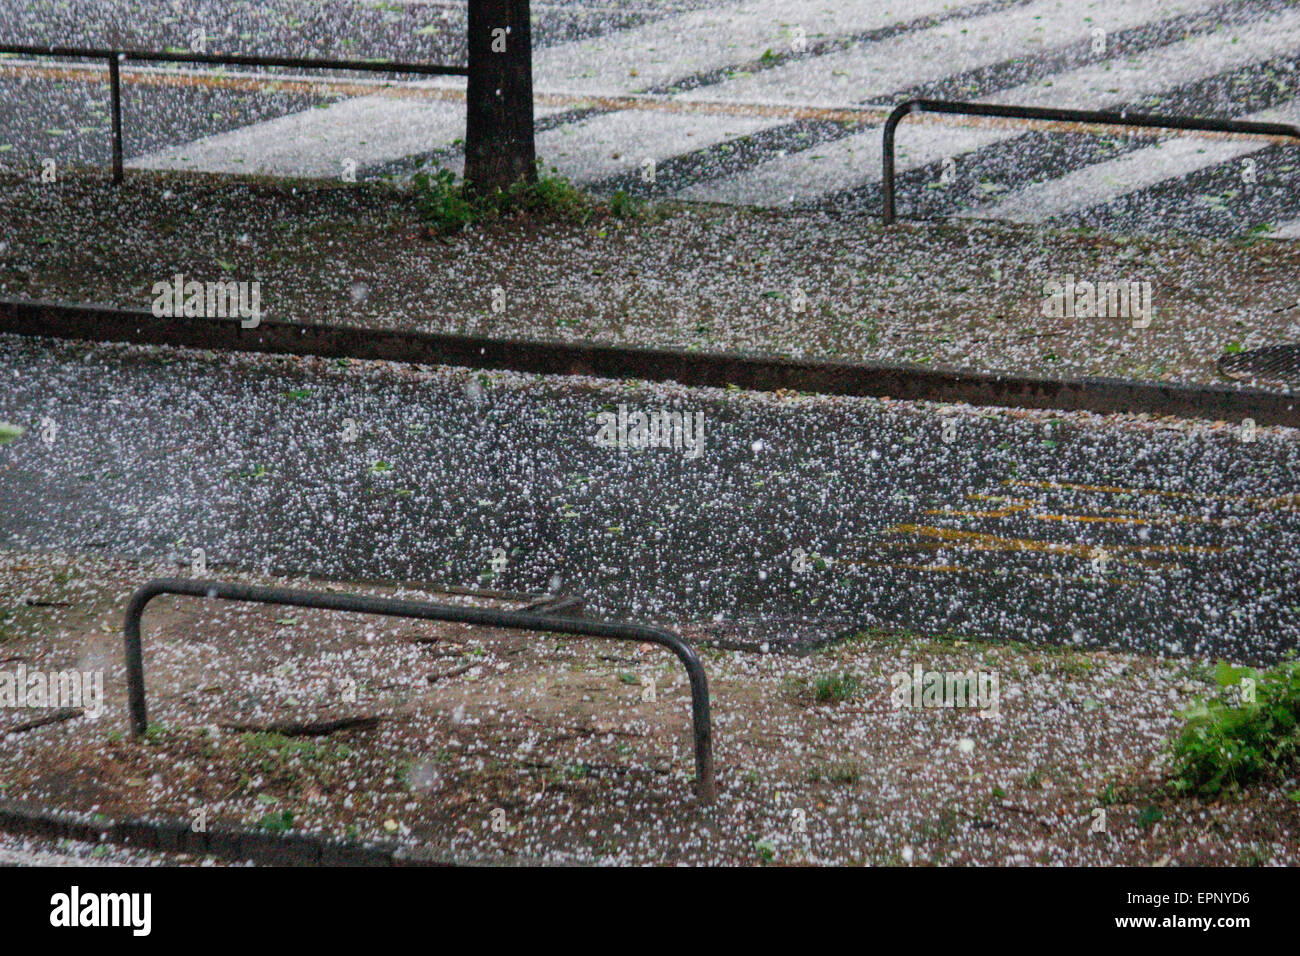 Turin, Italy. 20th May, 2015. The hailstorm covered with a white blanket the road. © Elena Aquila/Pacific Press/Alamy Live News Stock Photo